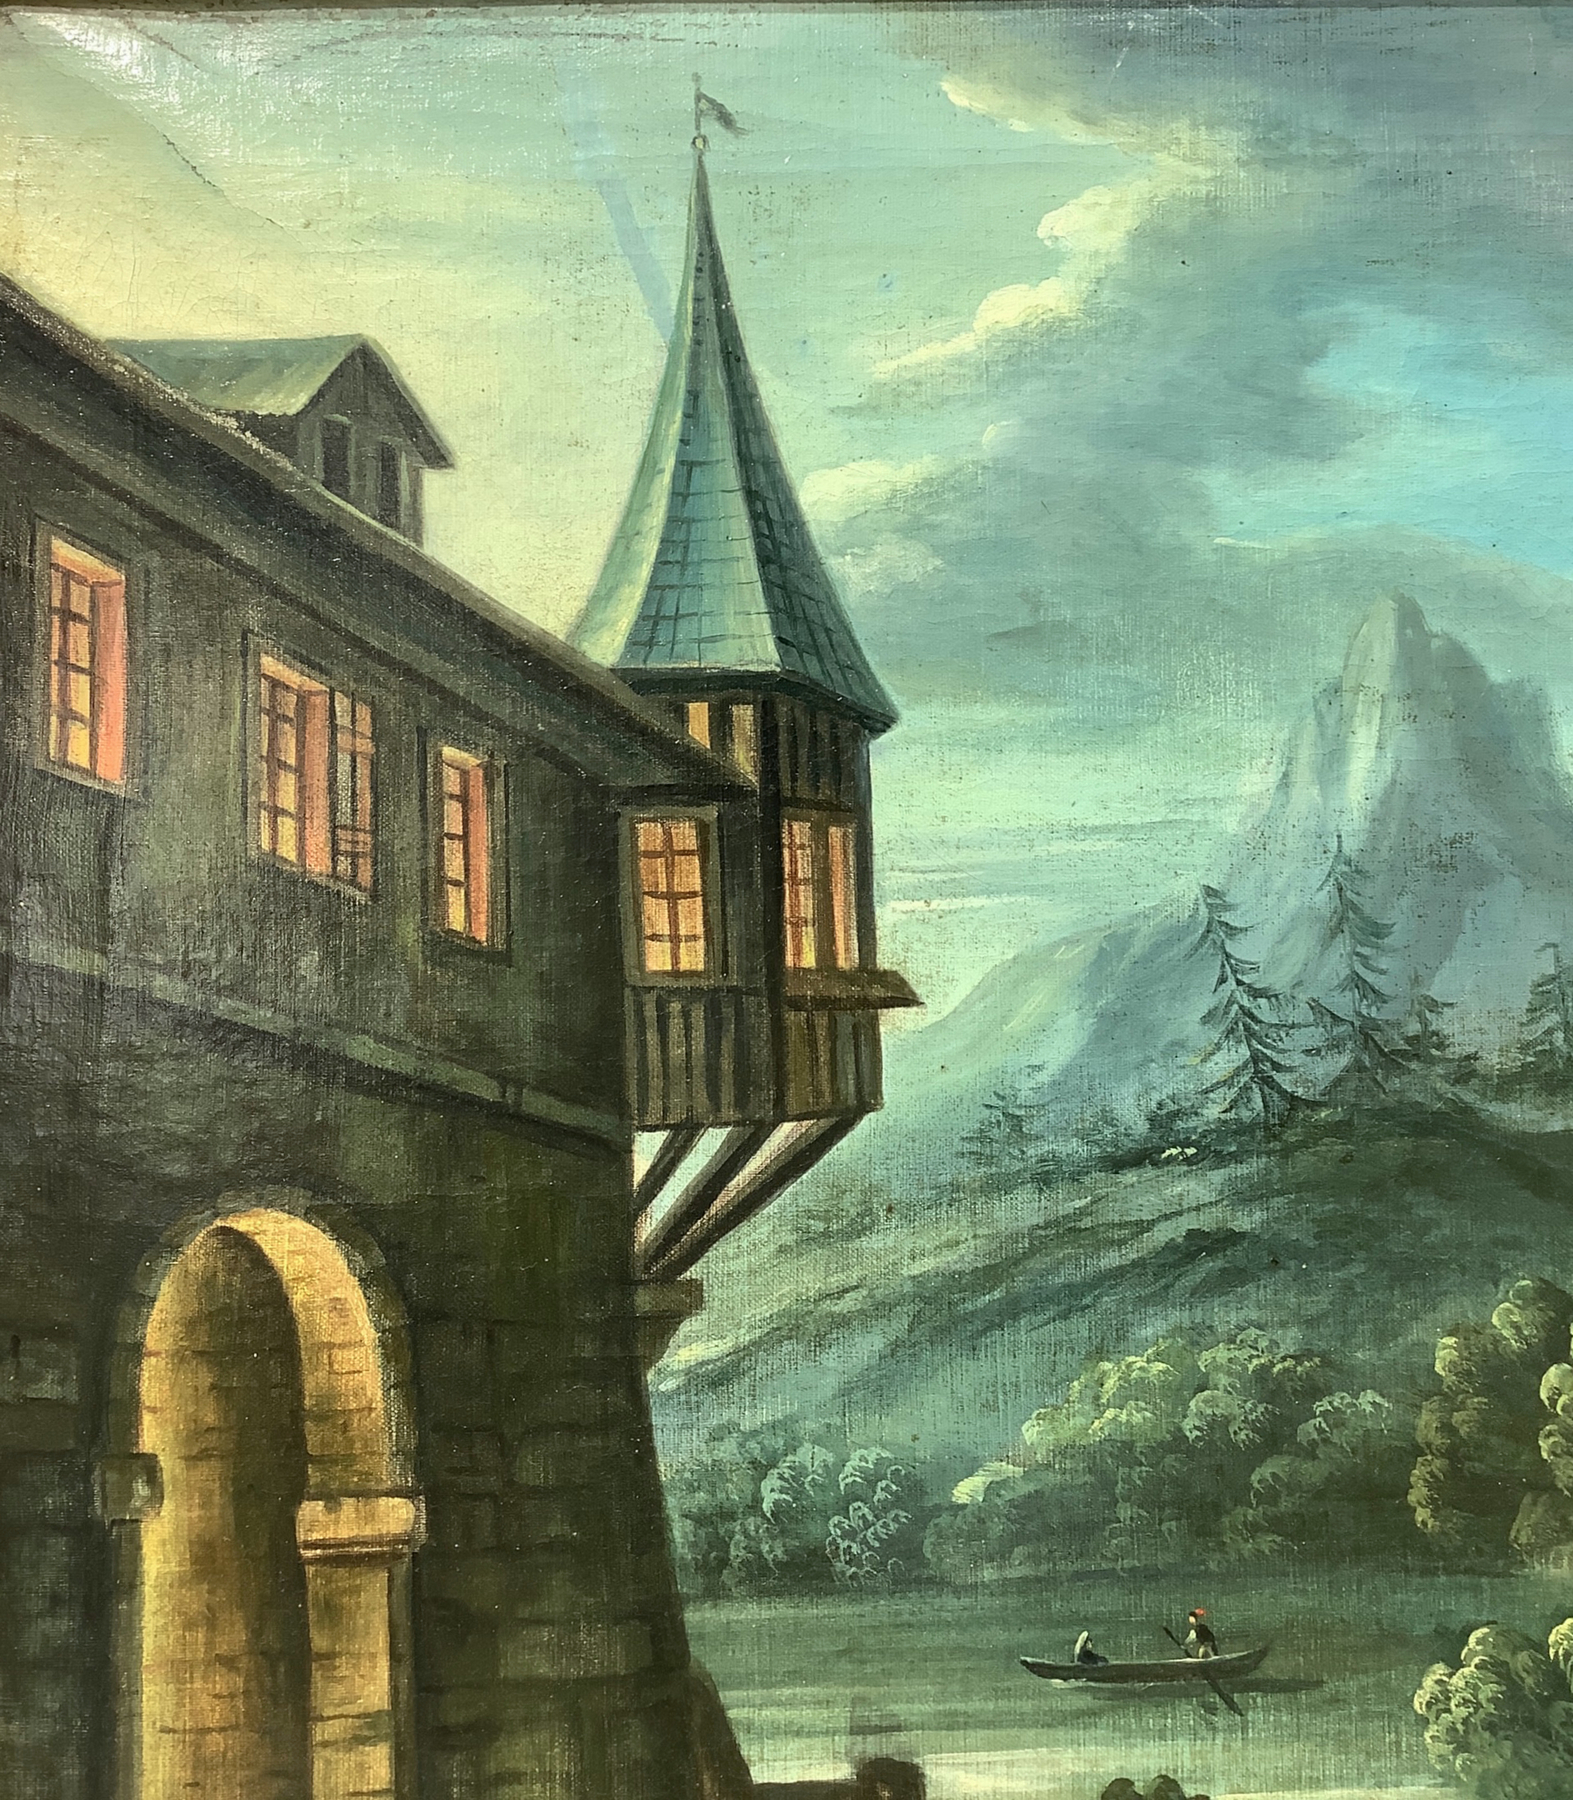 Oil painting on canvas depicting mountain landscape with lake and cottage, Federico Moja (Milano, 20 - Image 5 of 5